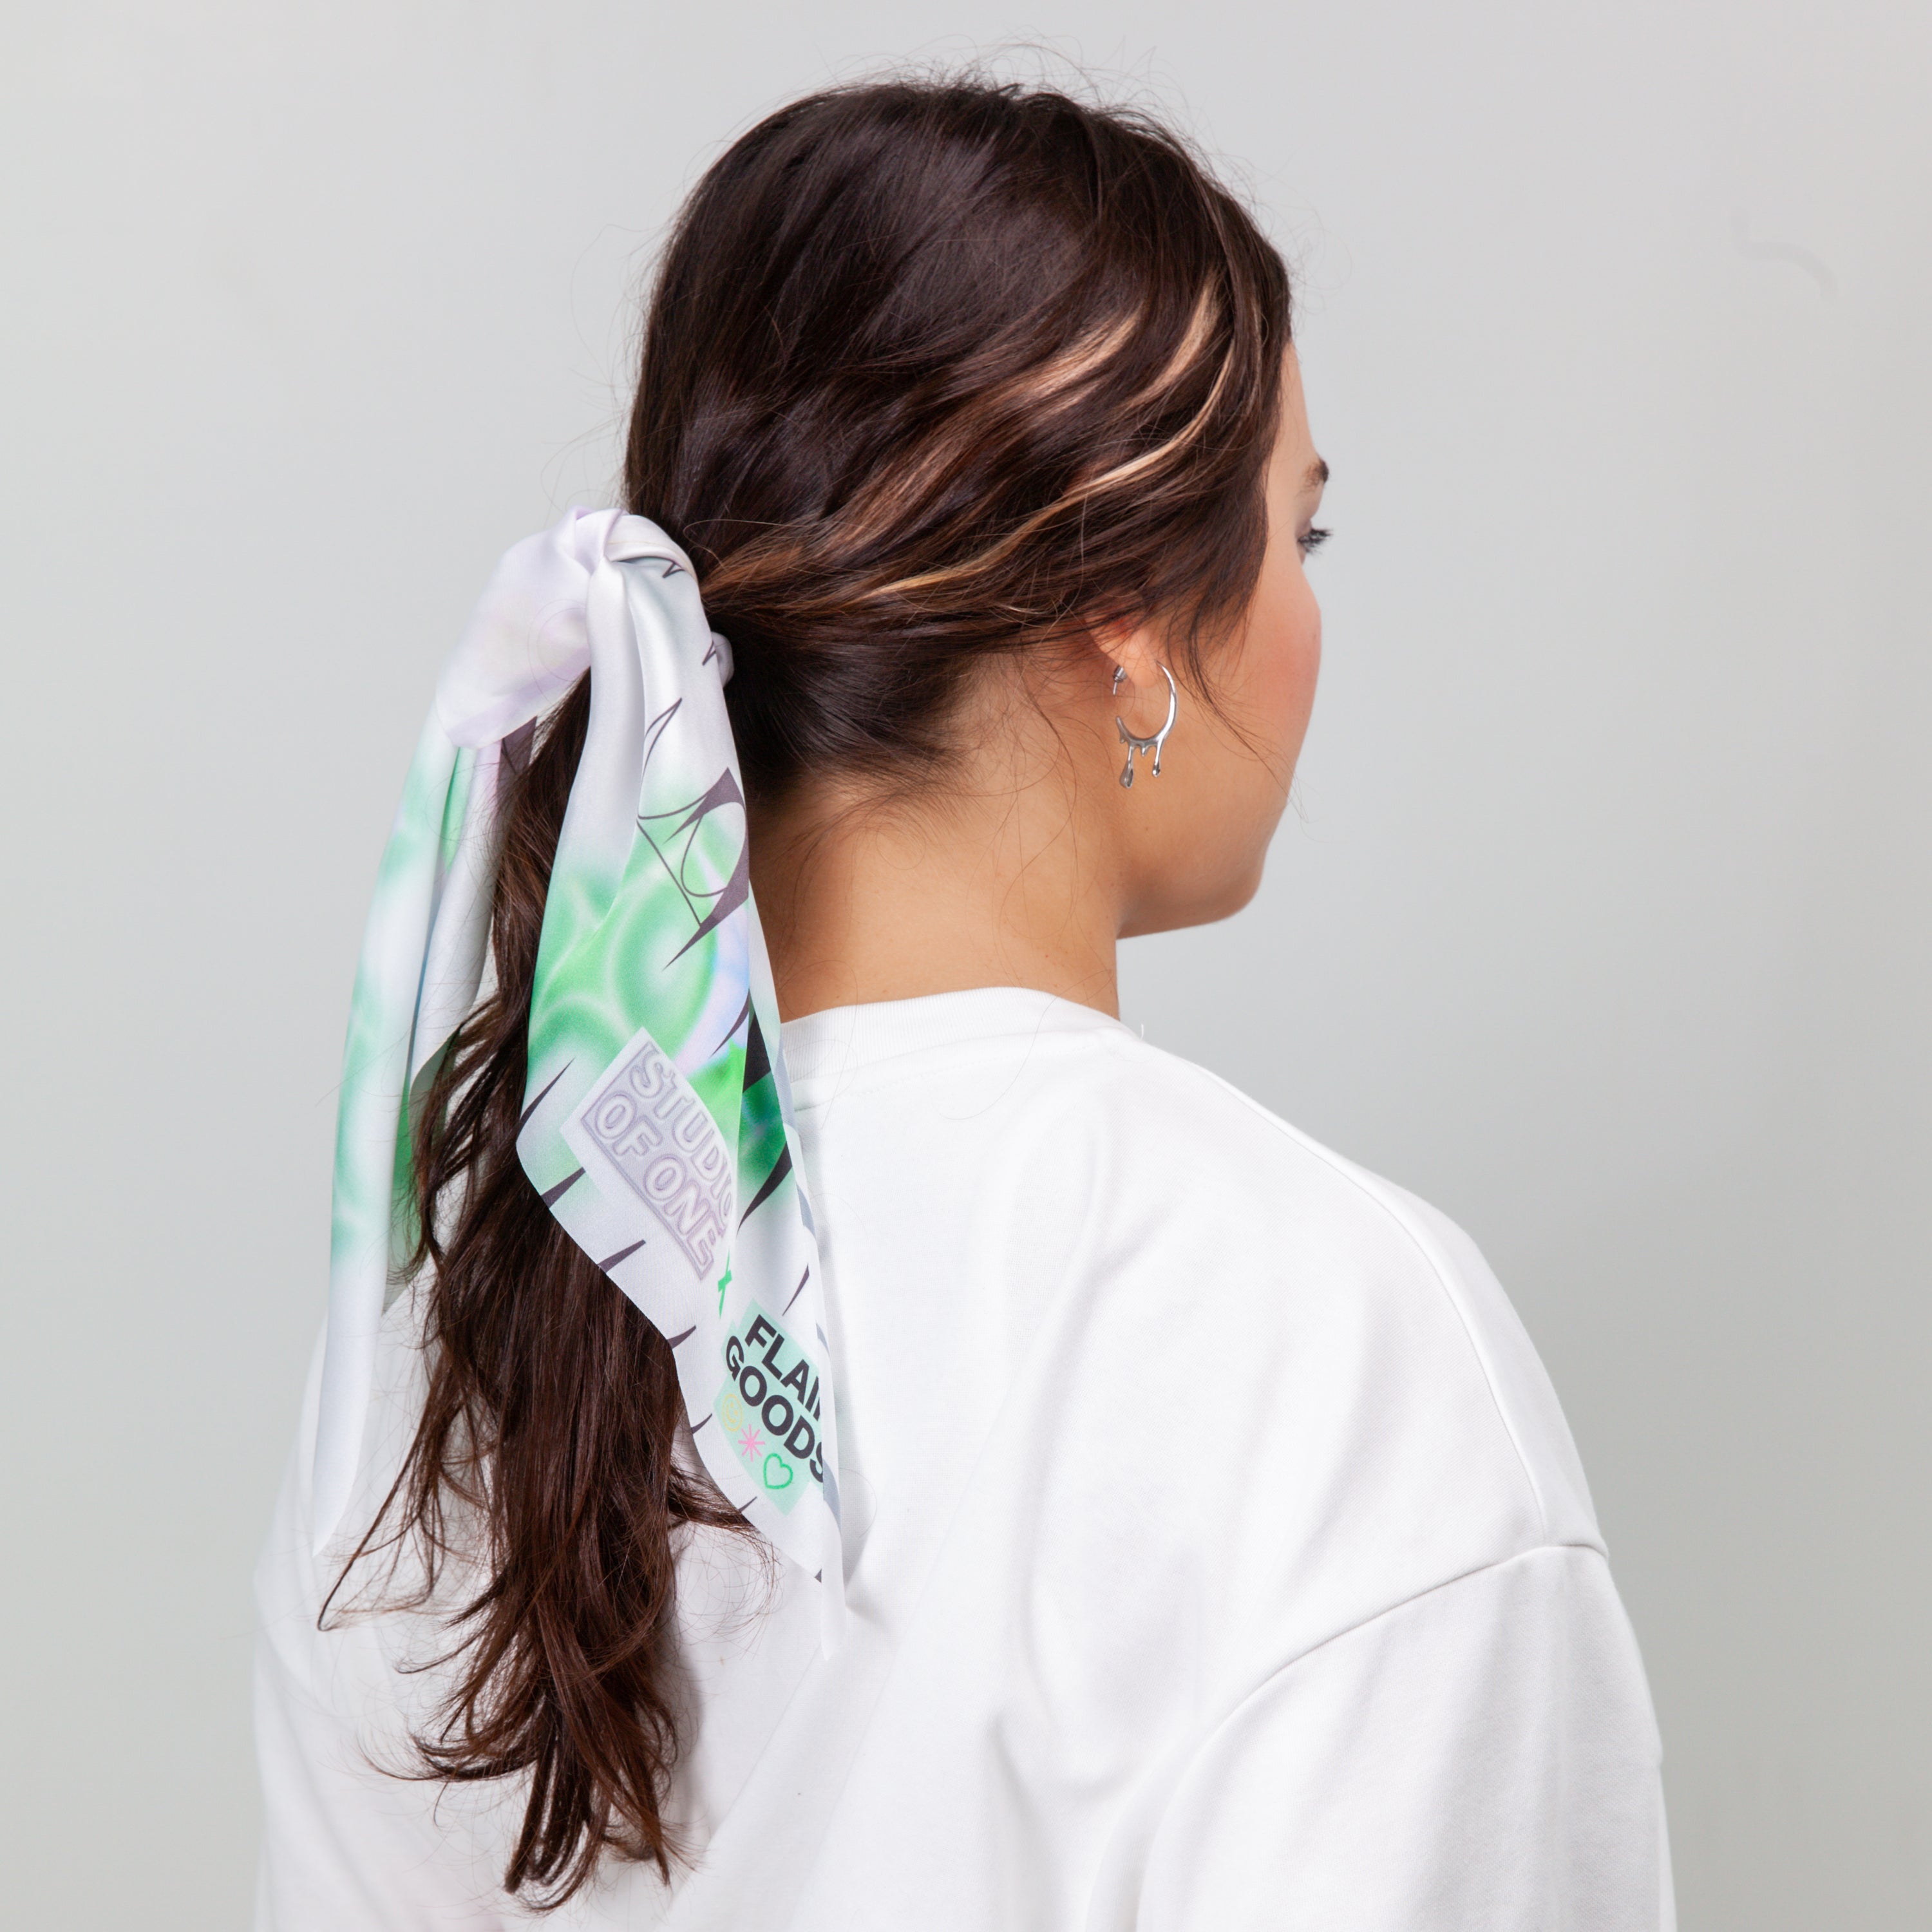 Studio of One Collab Scrunchie Scarf in "Starslinger"